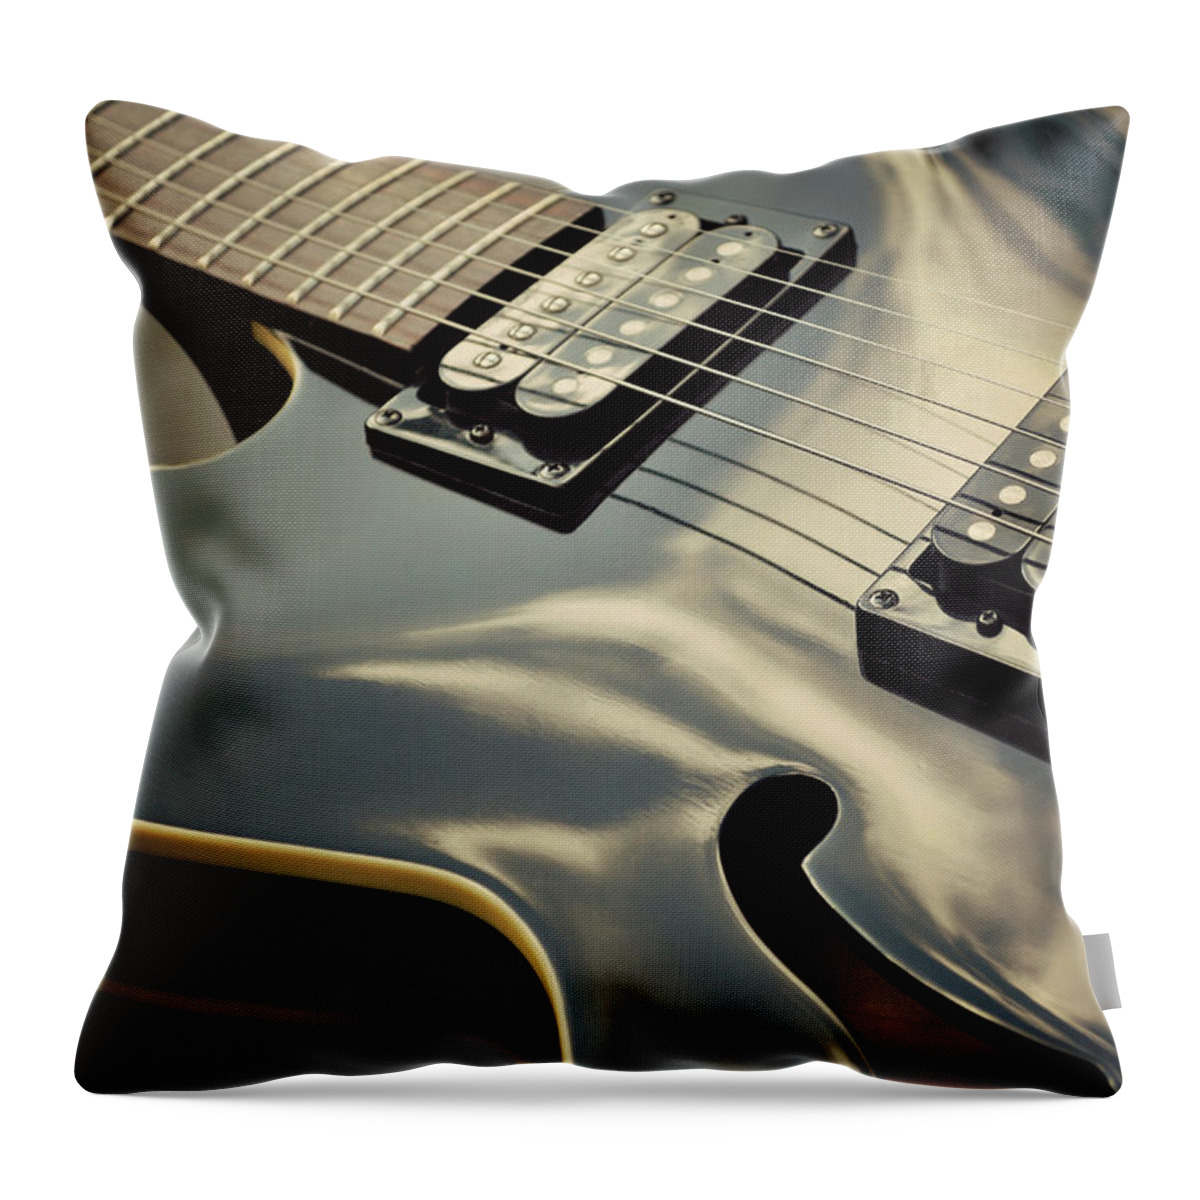 Black Color Throw Pillow featuring the photograph Black Guitar by Photo - Lyn Randle